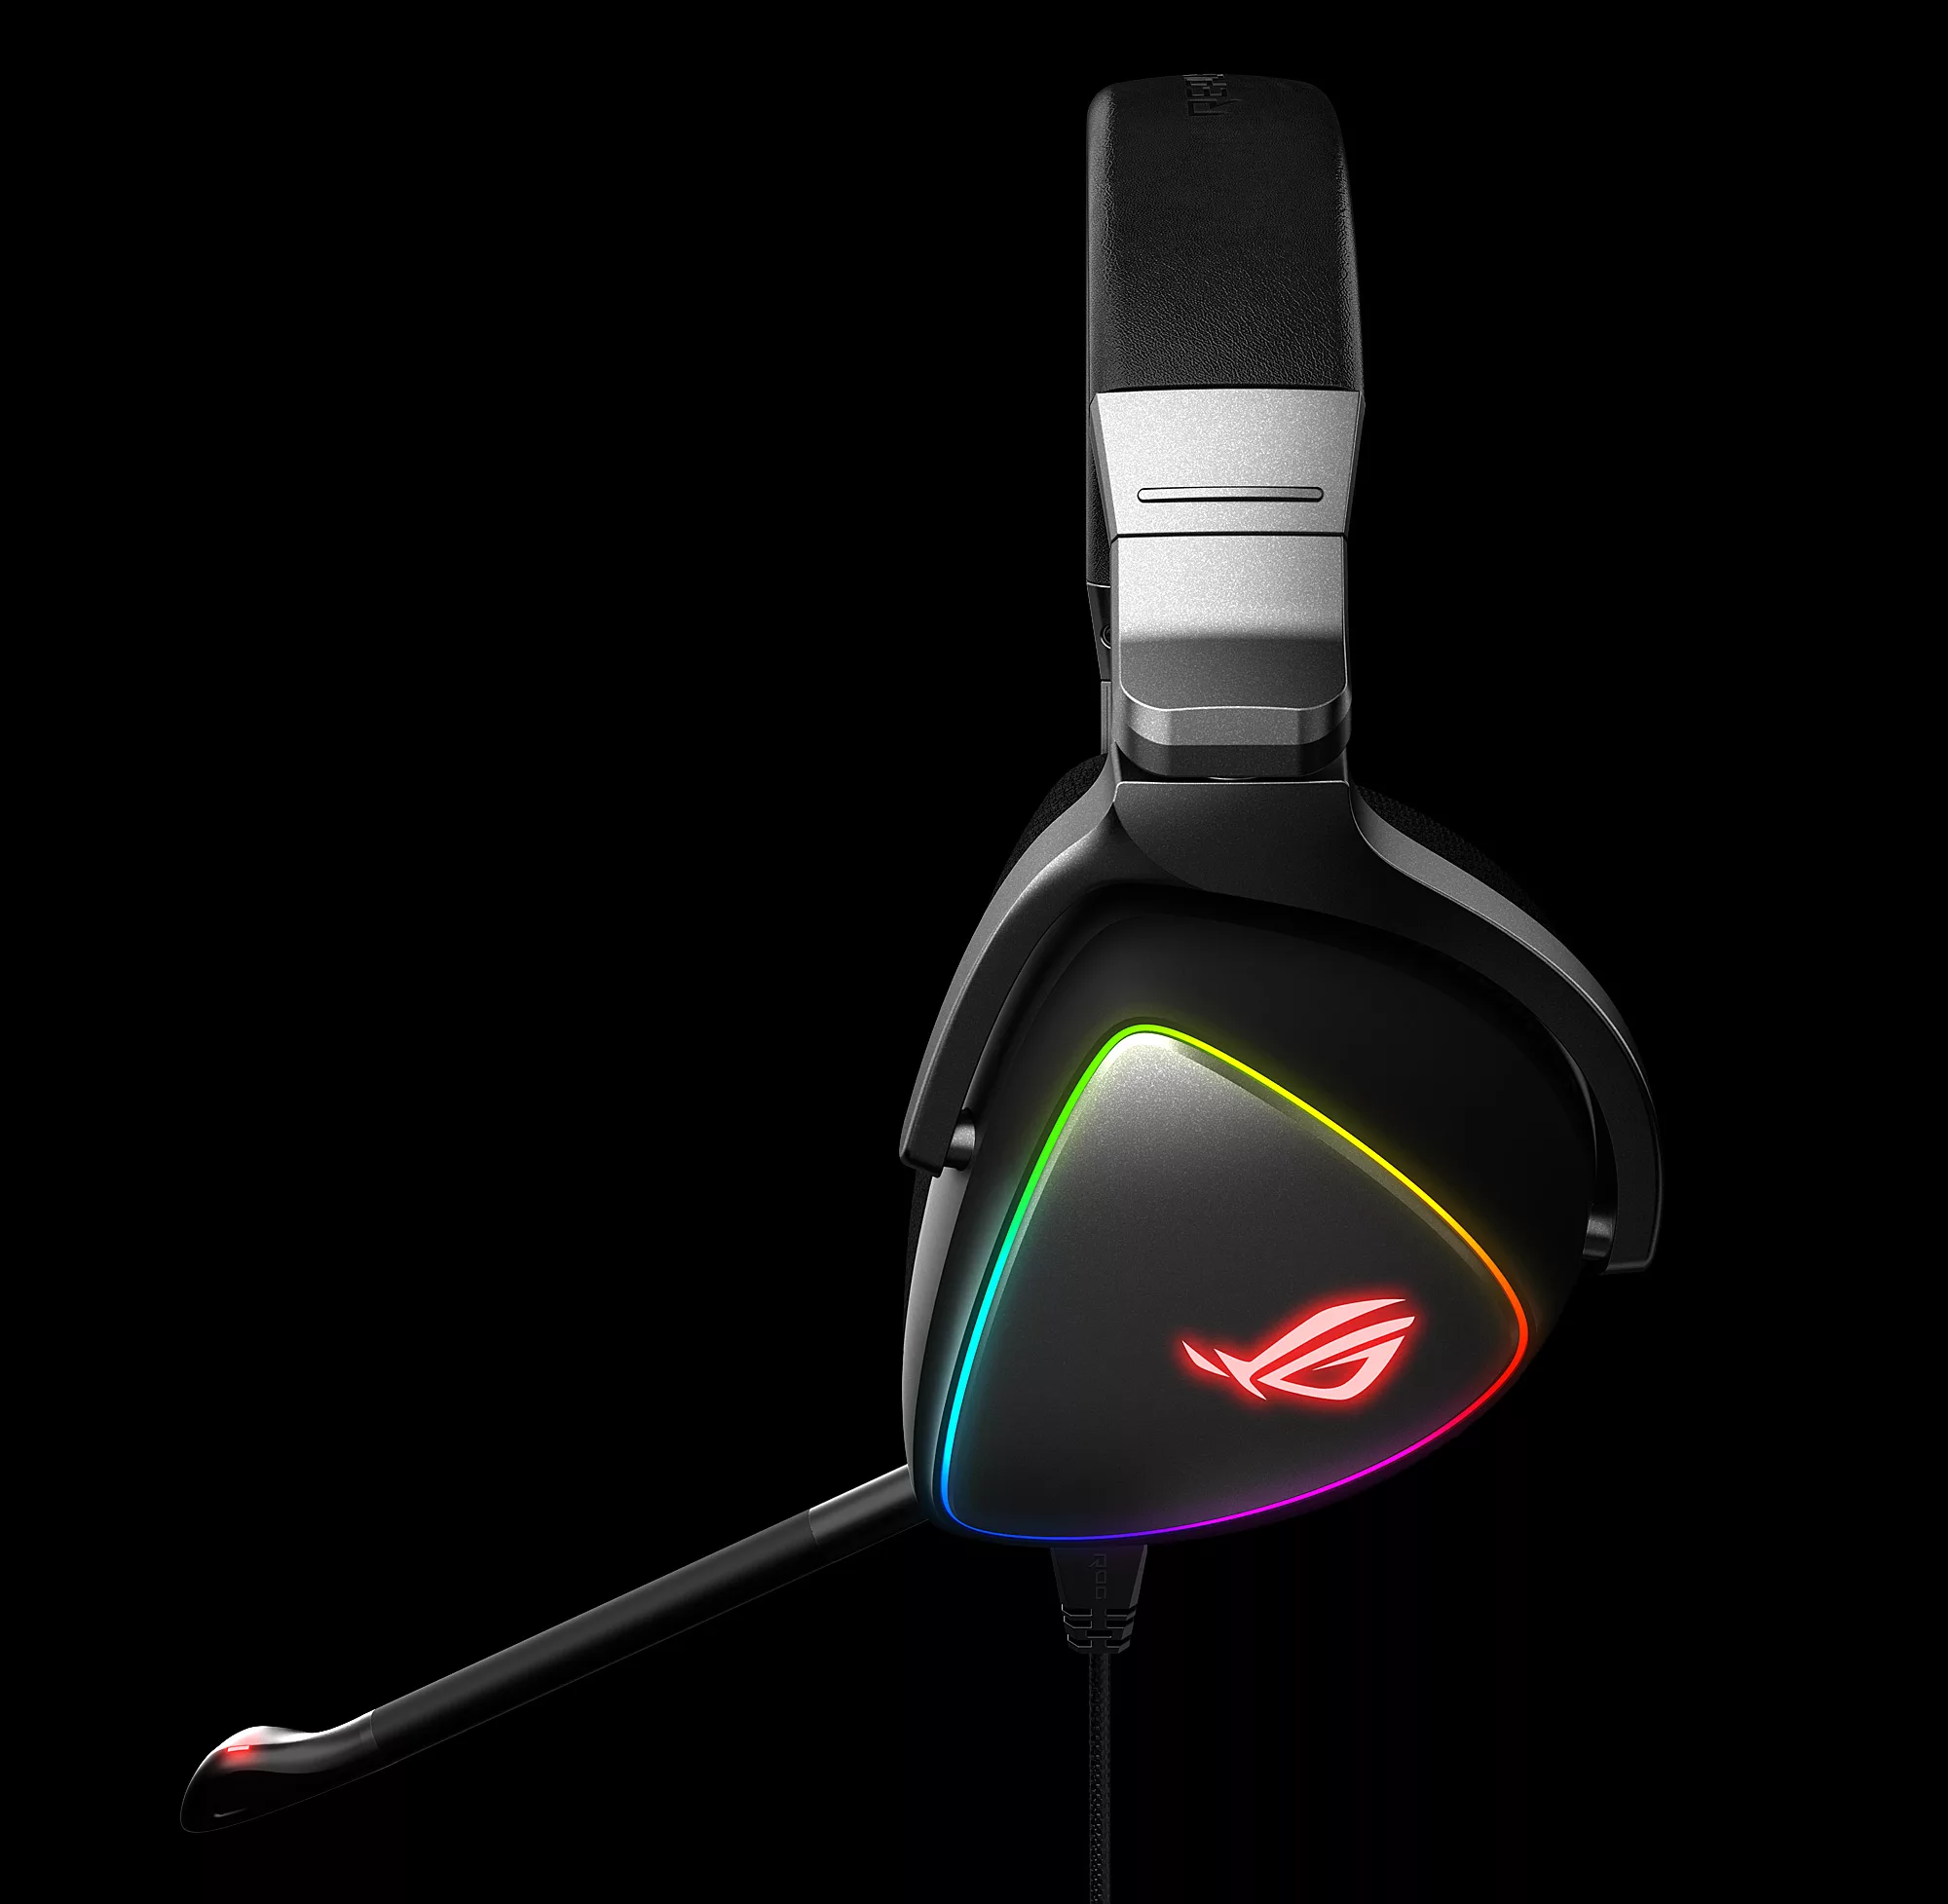 Enjoy digital audio bliss on PC and mobile with the ROG Delta Type-C  headset | ROG - Republic of Gamers Global